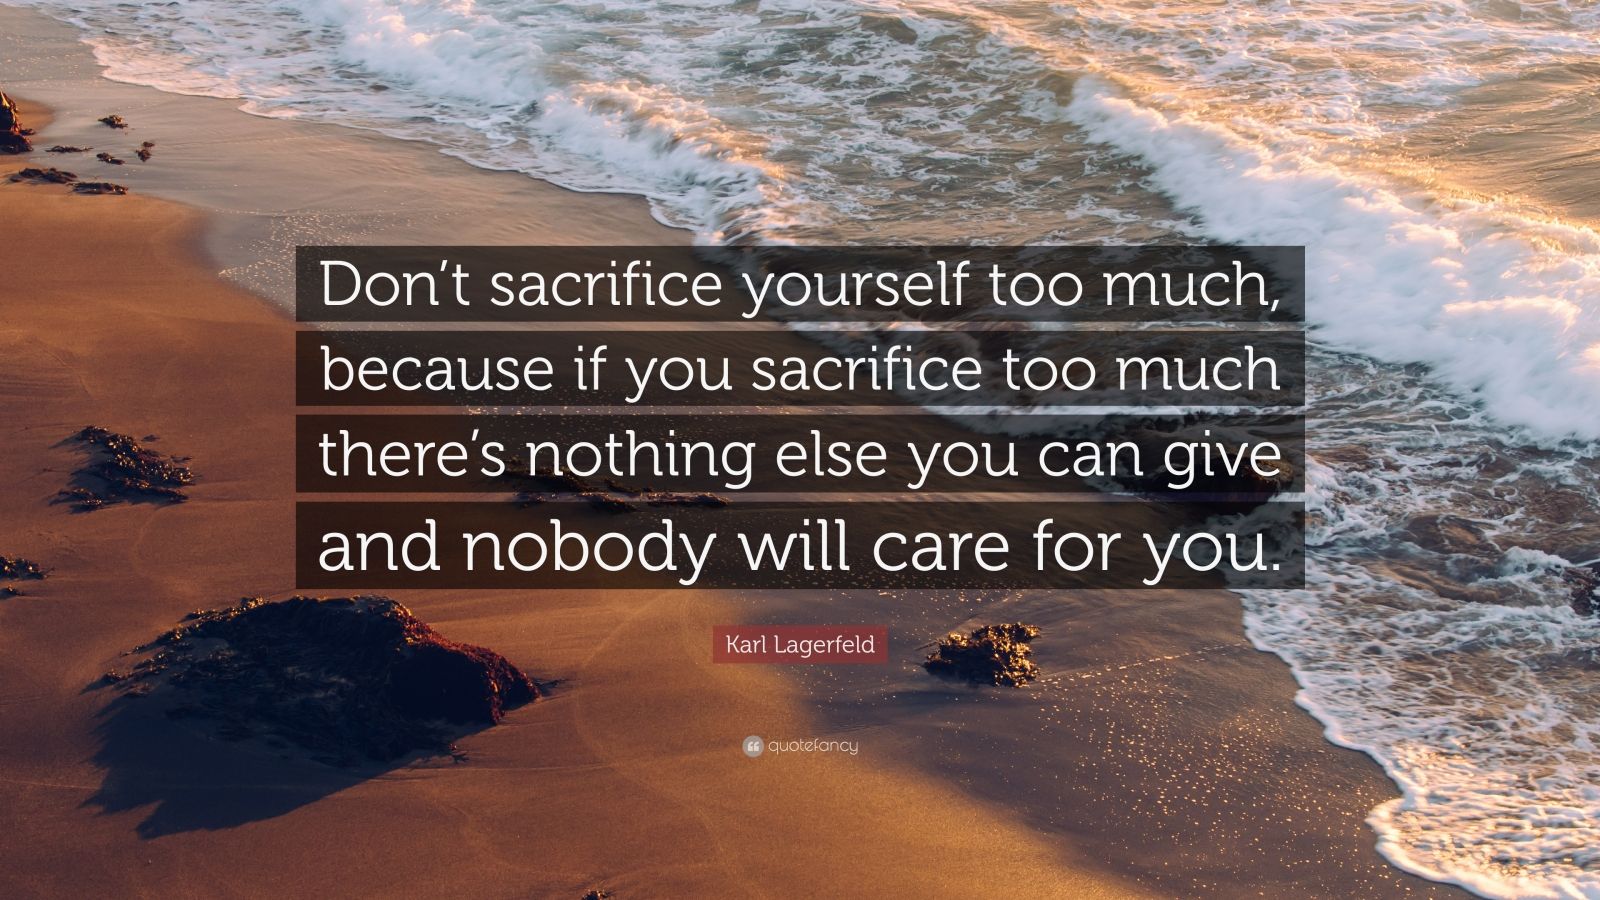 Karl Lagerfeld Quote: Don t sacrifice yourself too much because if